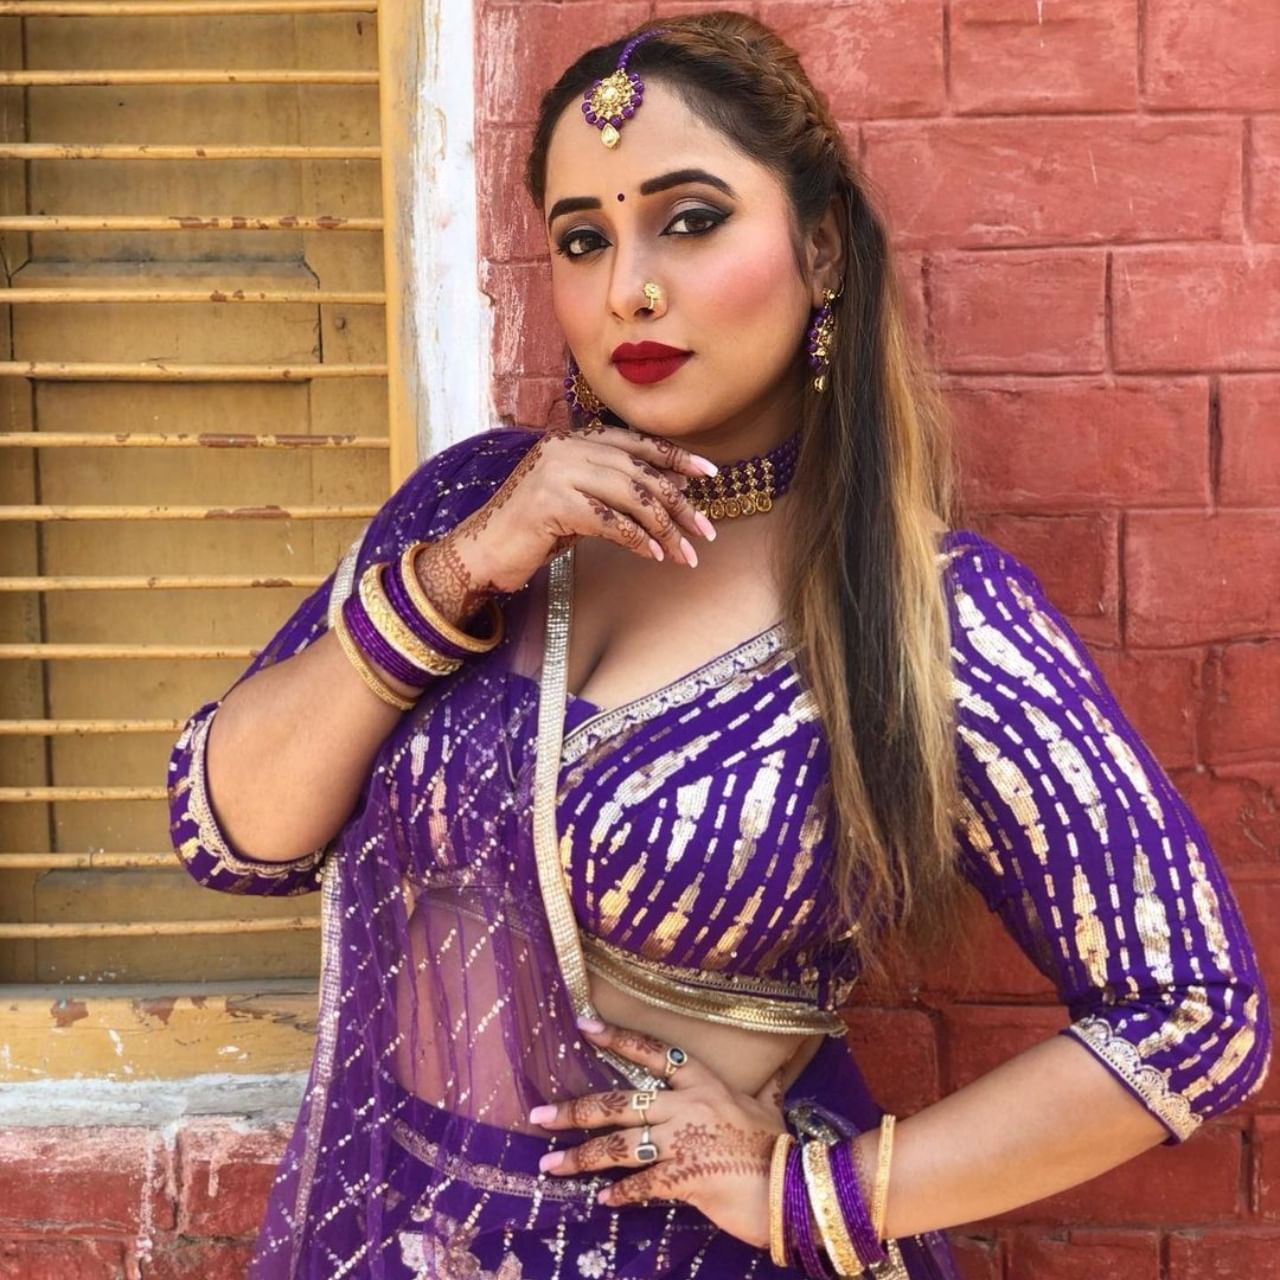 Rani Chatterjee Photos: The style of Rani Chatterjee, who won the hearts of fans with her beauty in Bhojpuri cinema, is completely different.  Fans like his films a lot and he is also followed on social media.  The actress keeps winning the hearts of fans with her latest photos.  (Photo credit- @ranichatterjeeofficial)